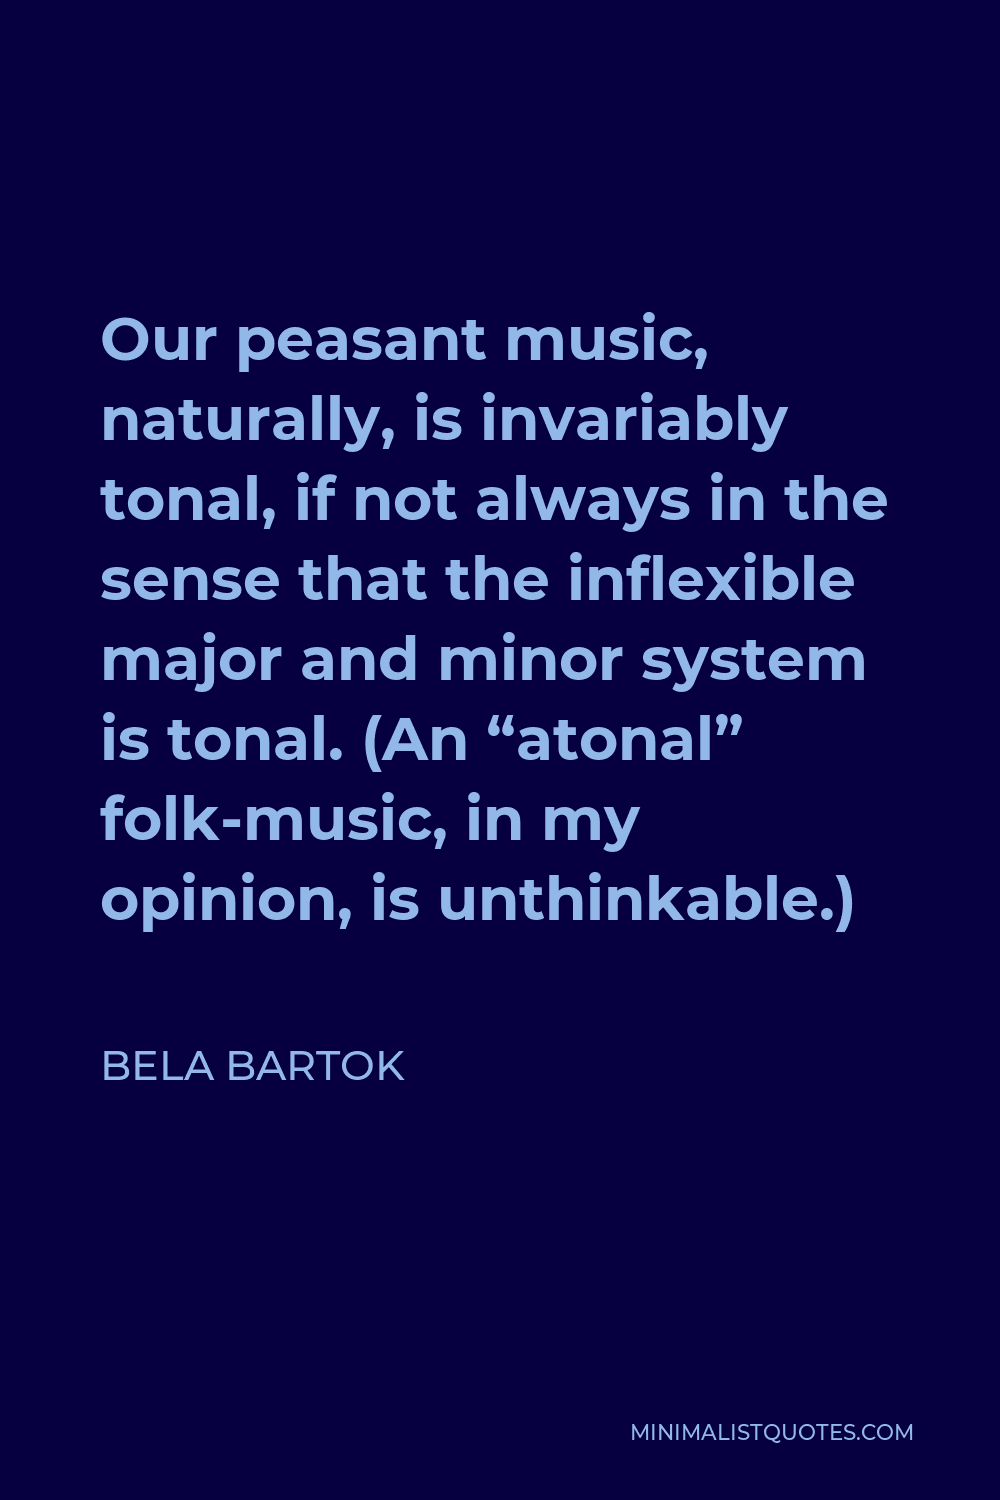 Bela Bartok Quote - Our peasant music, naturally, is invariably tonal, if not always in the sense that the inflexible major and minor system is tonal. (An “atonal” folk-music, in my opinion, is unthinkable.)